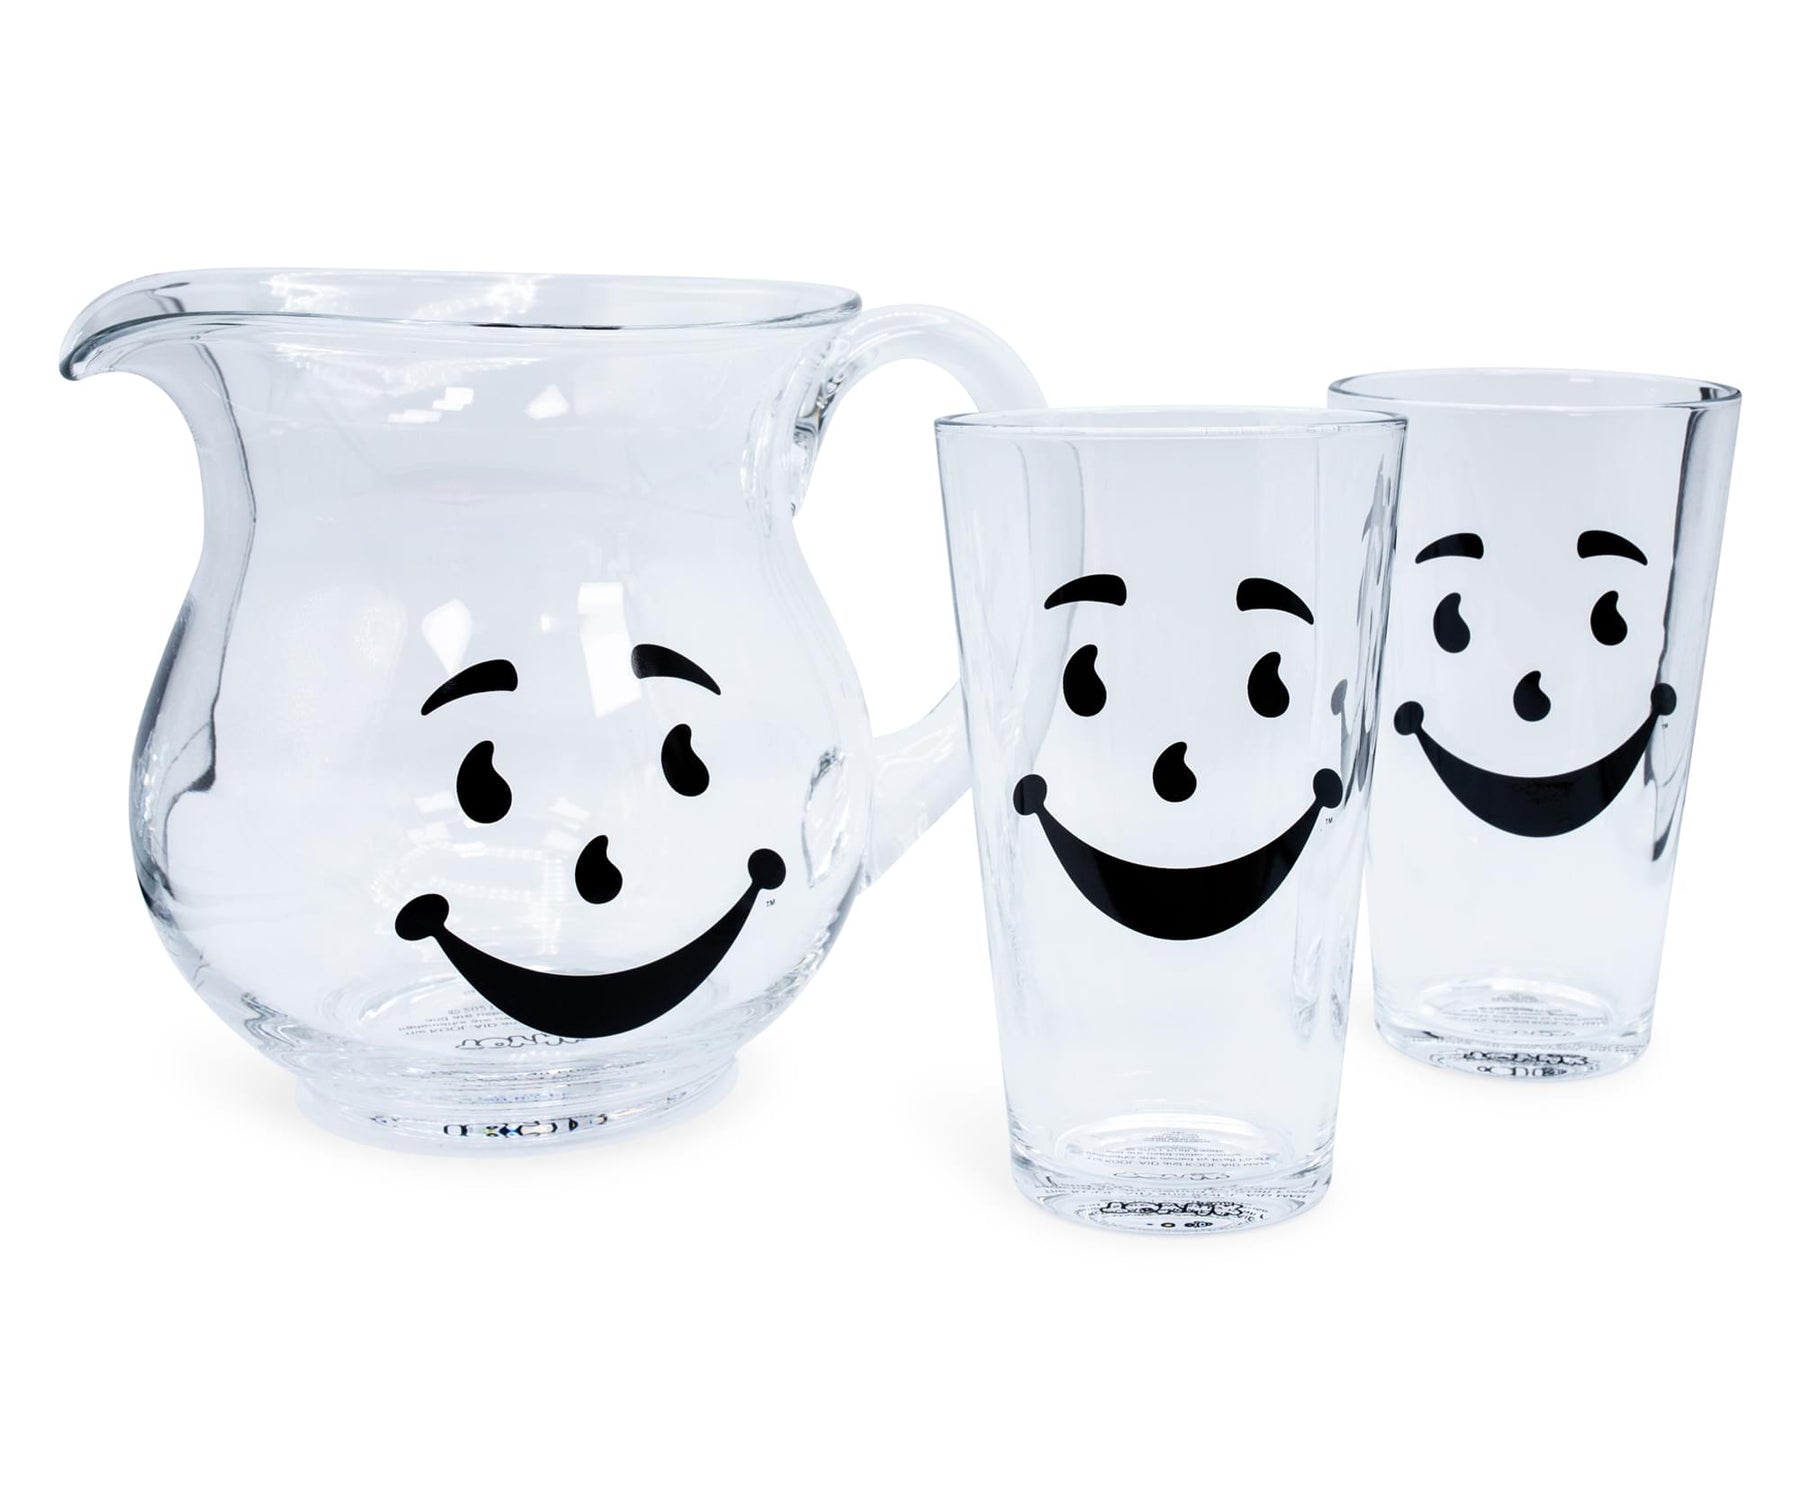 Kool-Aid Man 64-Ounce Glass Pitcher and Two 16-Ounce Pint Glasses